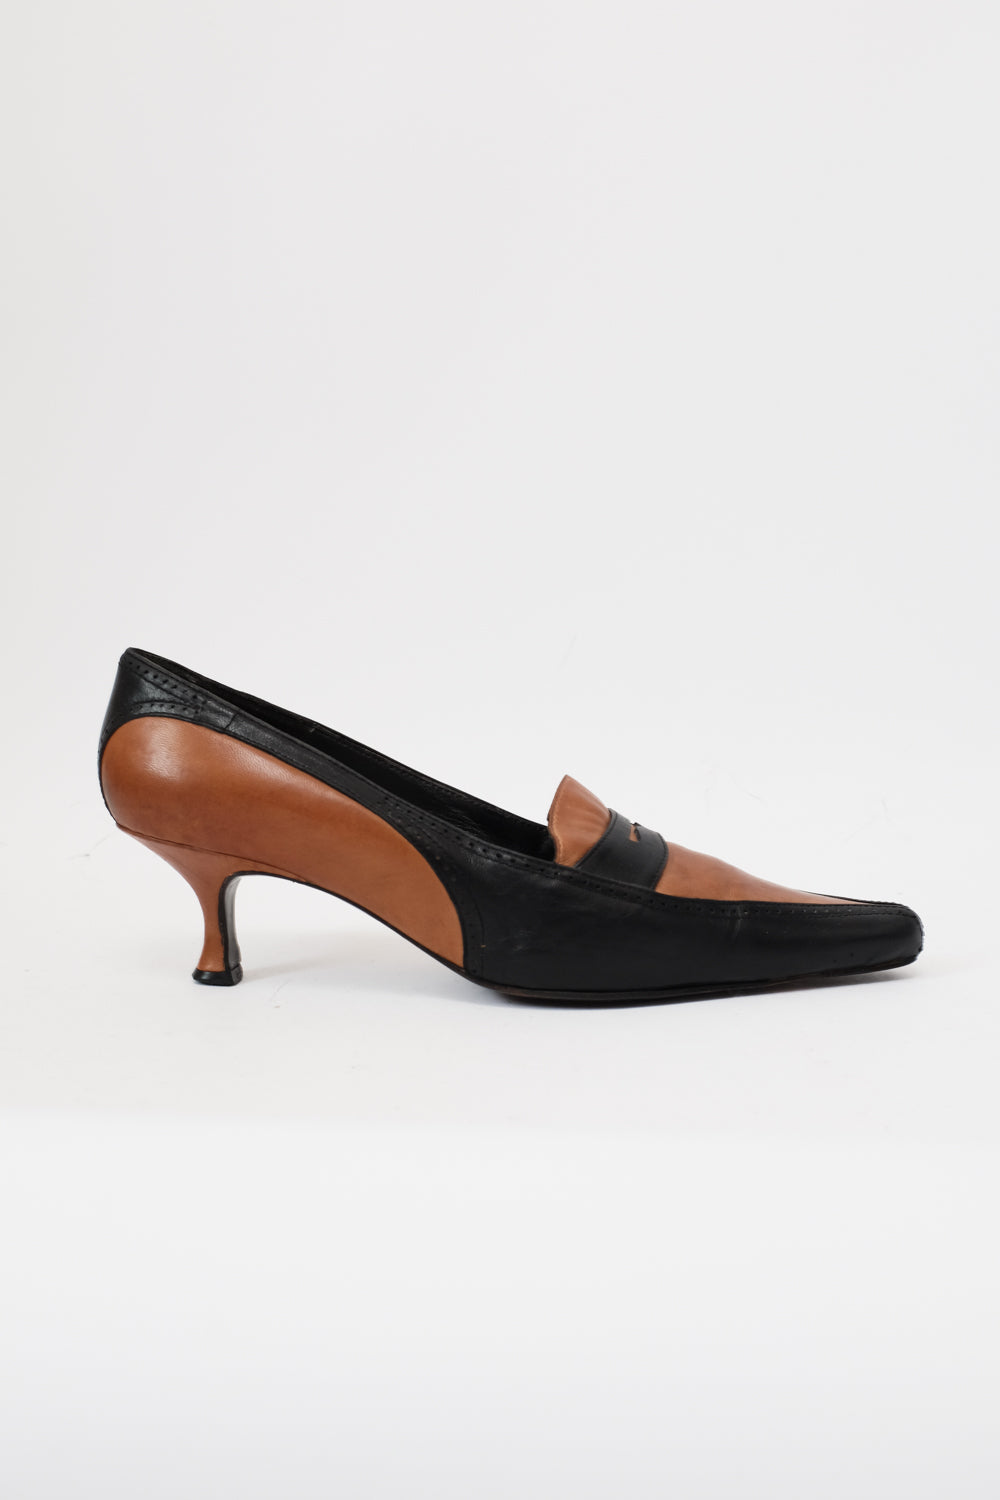 ITALY BLACK LEATHER  FLAT PUMPS 38